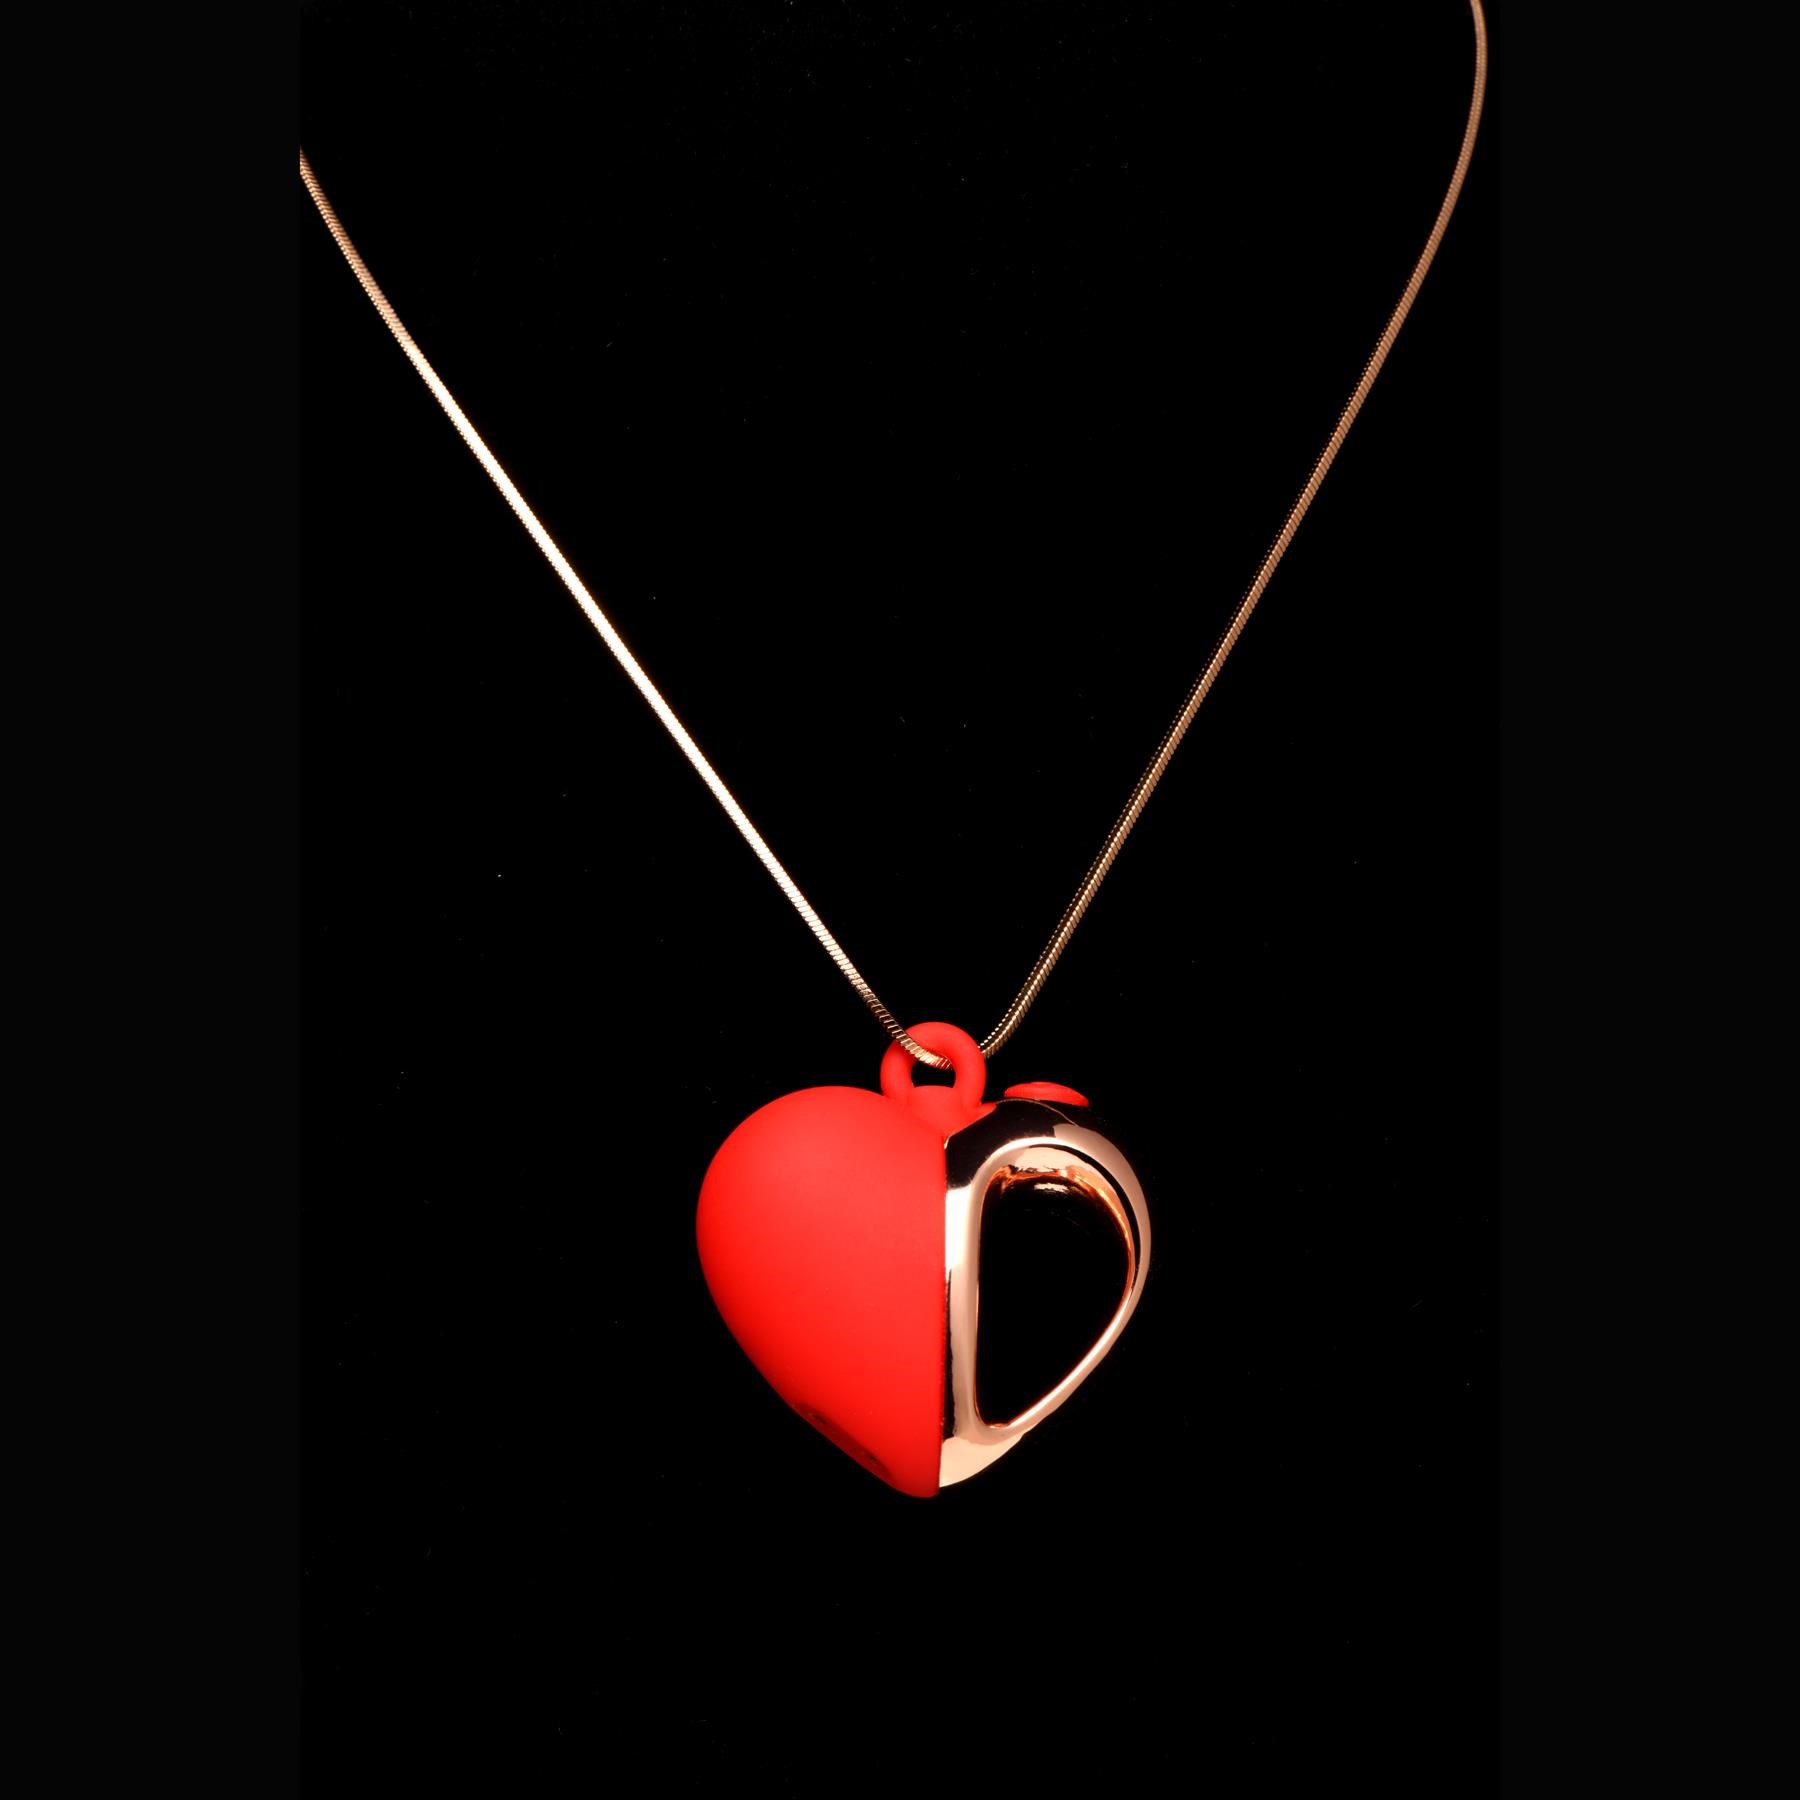 Charmed Silicone Heart Necklace - Product Shot - Black Background